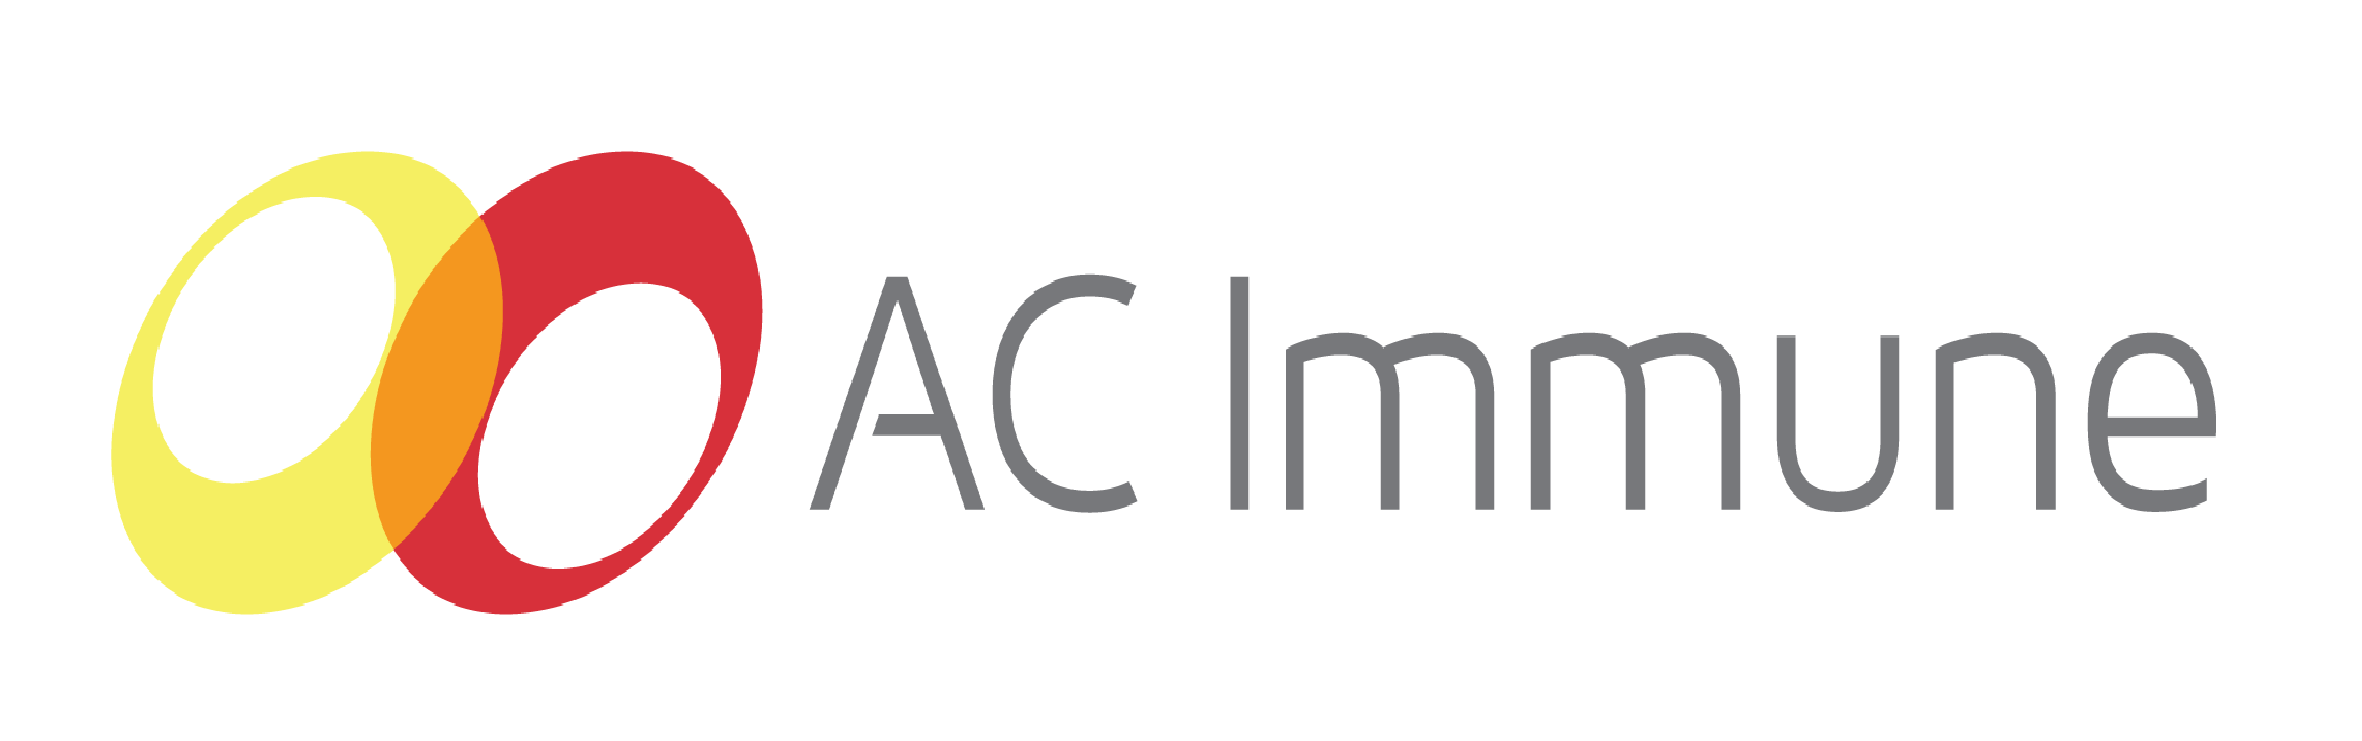 AC Immune Opens New Centers in Phase 1b/2 Trial Evaluating ACI-24 Targeting Abeta in Alzheimer's Disease and Down Syndrome